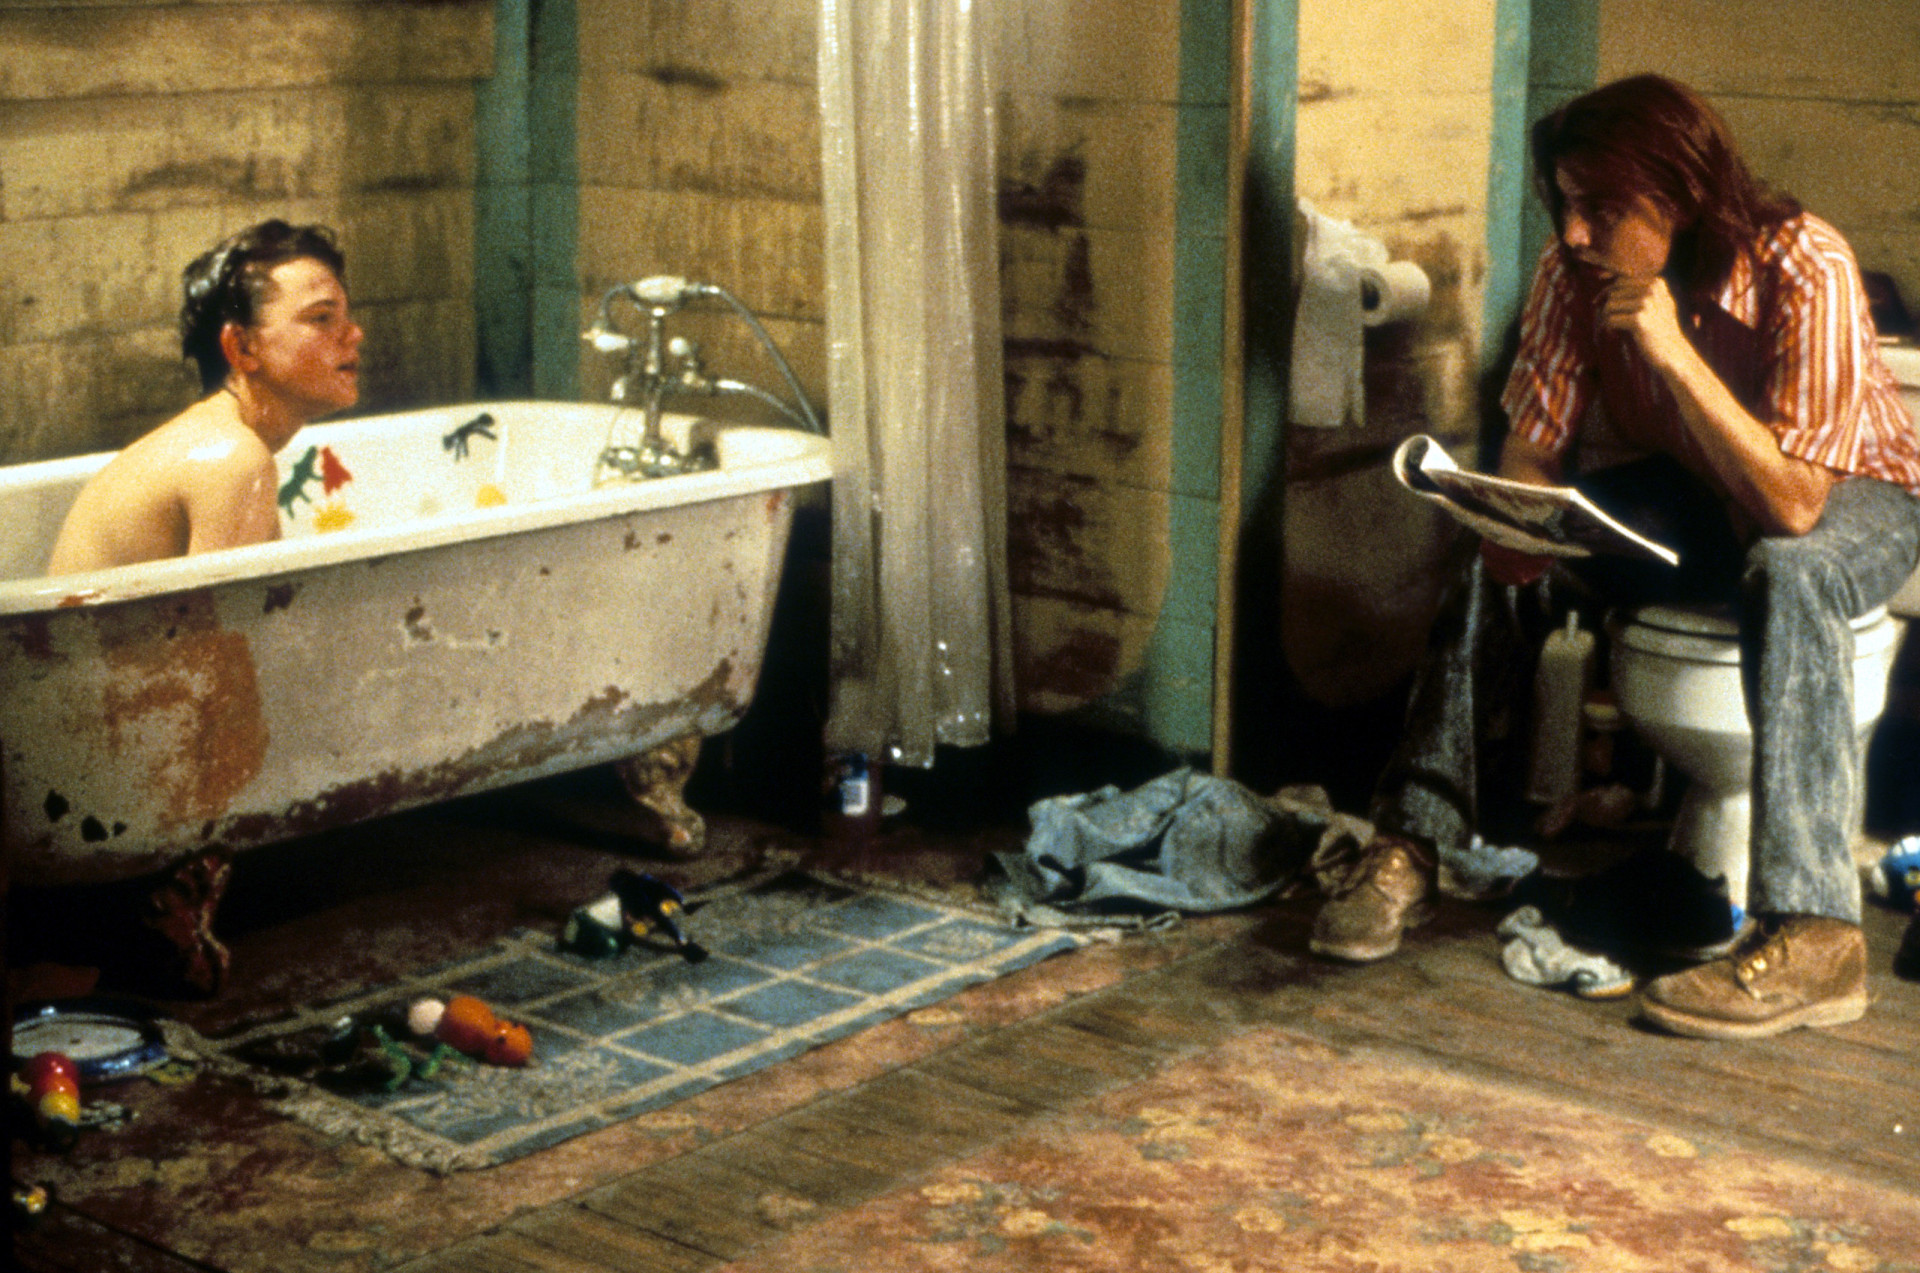 <p>Johnny Depp and Leonardo DiCaprio both received critical acclaim for their work in this coming-of-age drama. Despite DiCaprio's character Arnie suffering from aquaphobia, he's seen bathing in a dilapidated bathtub while Gilbert (Depp) looks on, sitting on the toilet.</p><p><a href="https://www.msn.com/en-us/community/channel/vid-7xx8mnucu55yw63we9va2gwr7uihbxwc68fxqp25x6tg4ftibpra?cvid=94631541bc0f4f89bfd59158d696ad7e">Follow us and access great exclusive content every day</a></p>